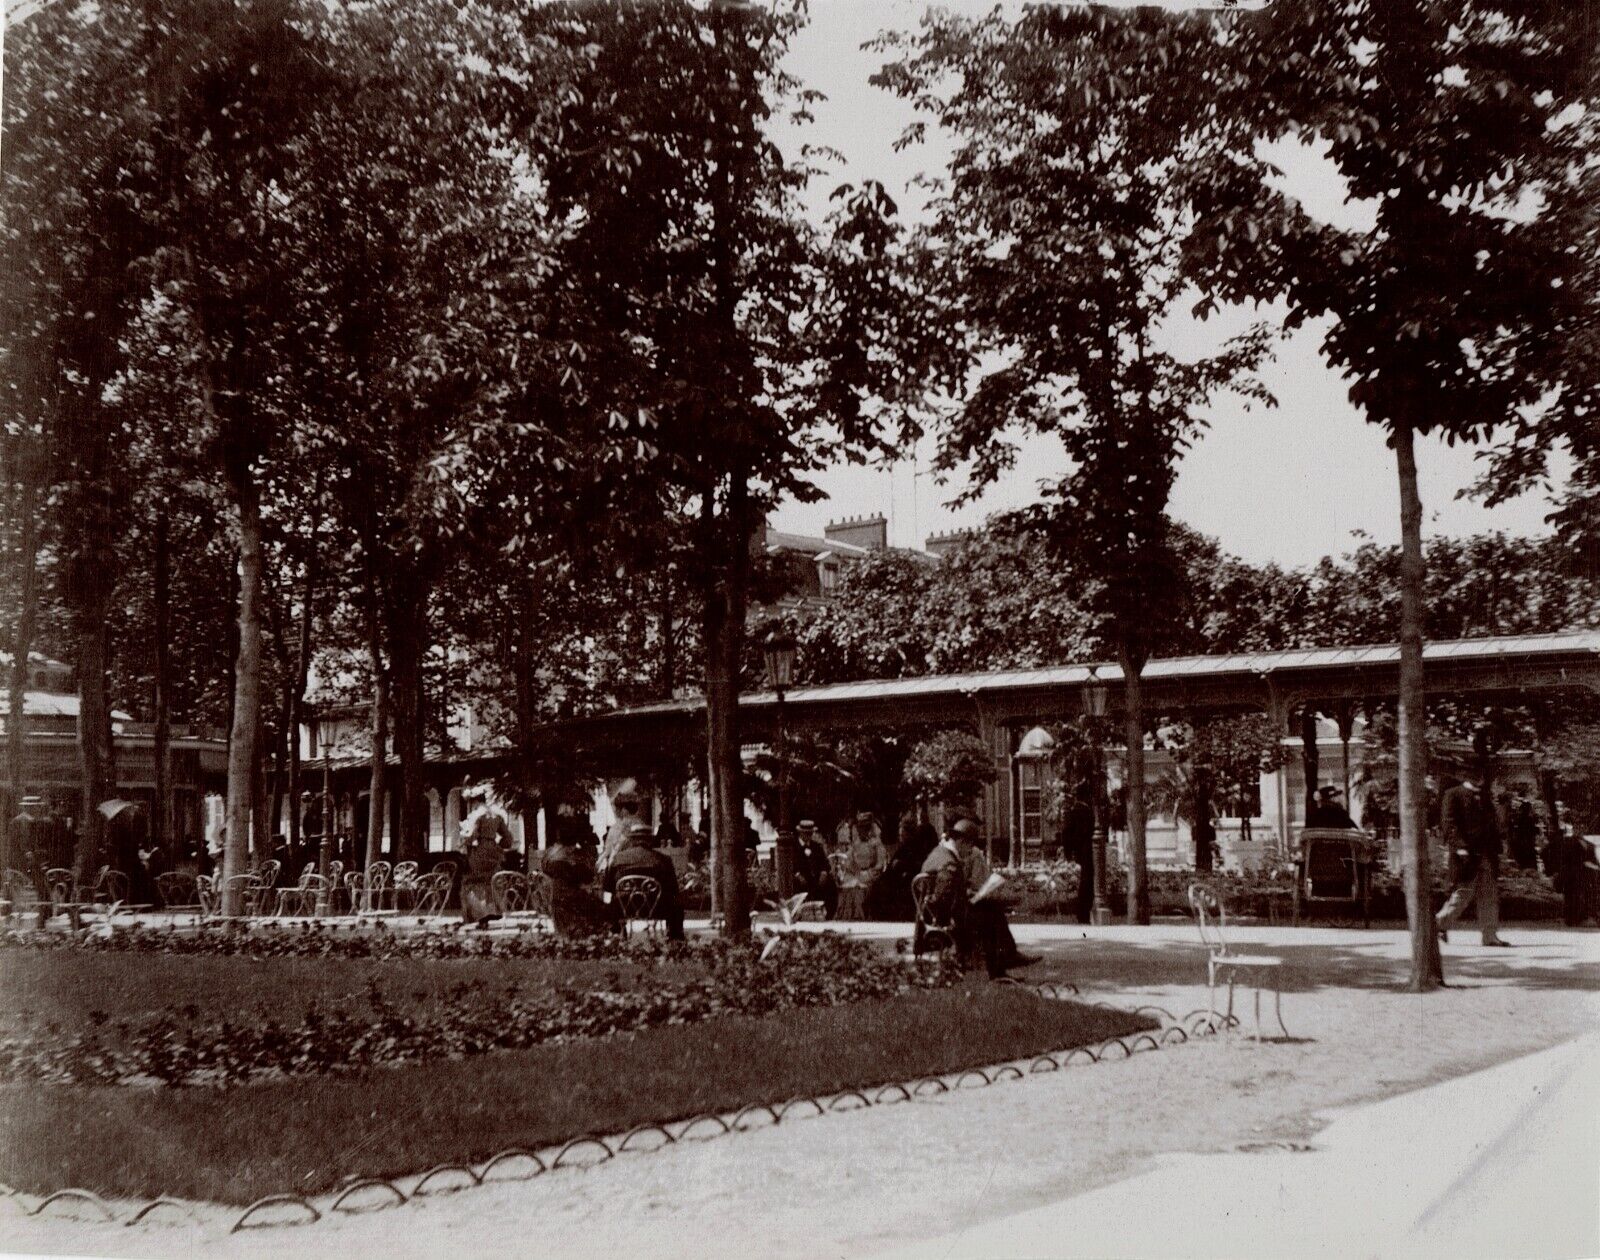 FRANCE VICHY Allier - year 1905 in the old park